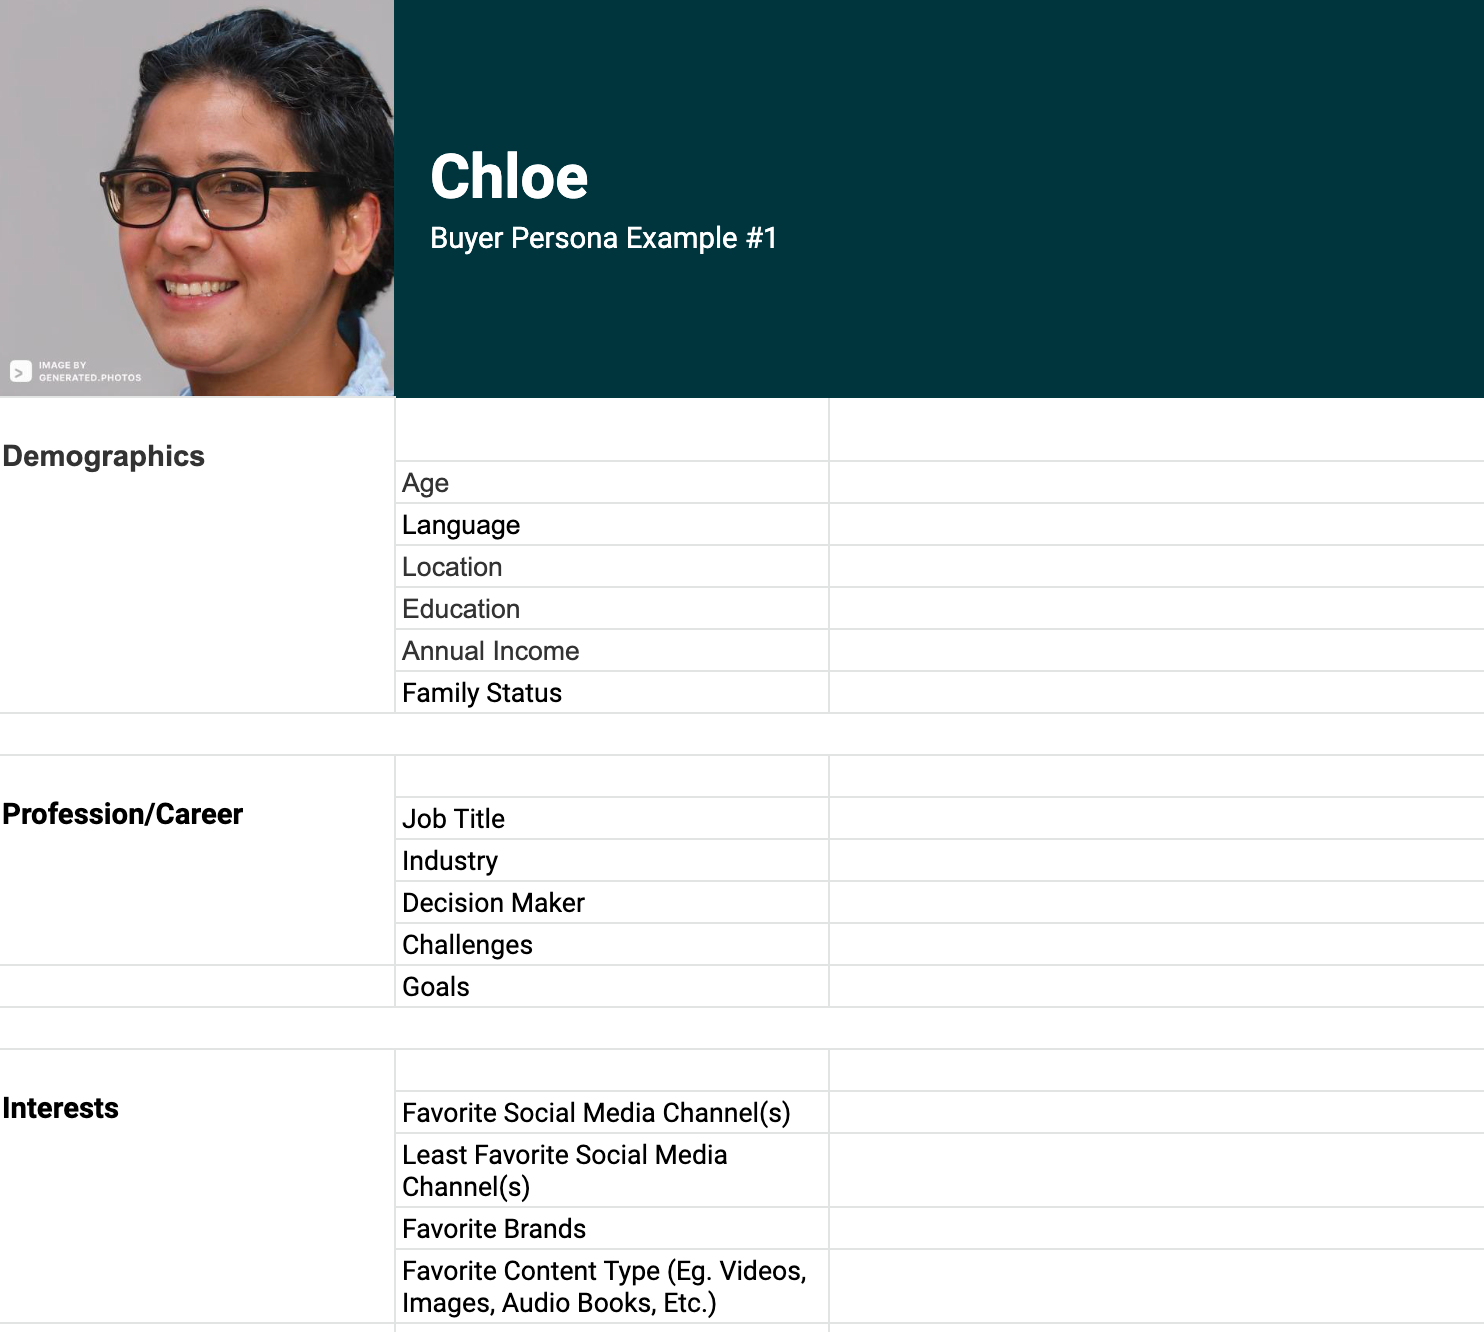 A screenshot of the downloadable buyer persona template, featuring a hypothetical buyer persona named Chloe as an example. It contains room to add details about her age, language, location, education, annual income, family status, job title, industry, decision maker, challengers, goals, favorite social media channels, least favorite social media channels, favorite brands, and favorite content types.